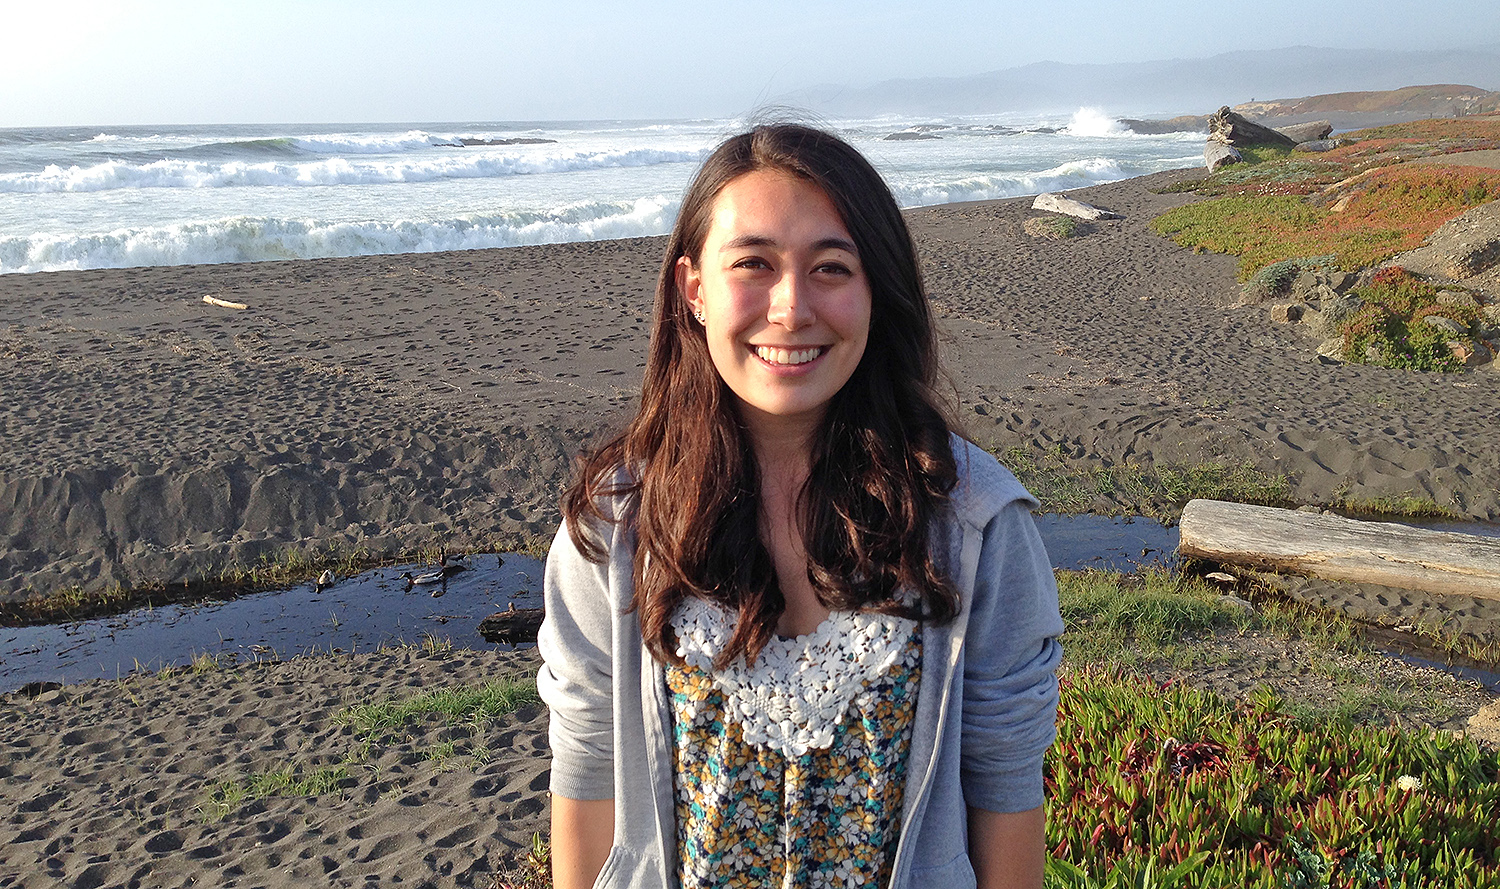 Doris Duke Conservation Scholar Olivia Won ’18 is interested in addressing issues of climate justice by reorienting environmental action to work through a place-based, social justice lens.